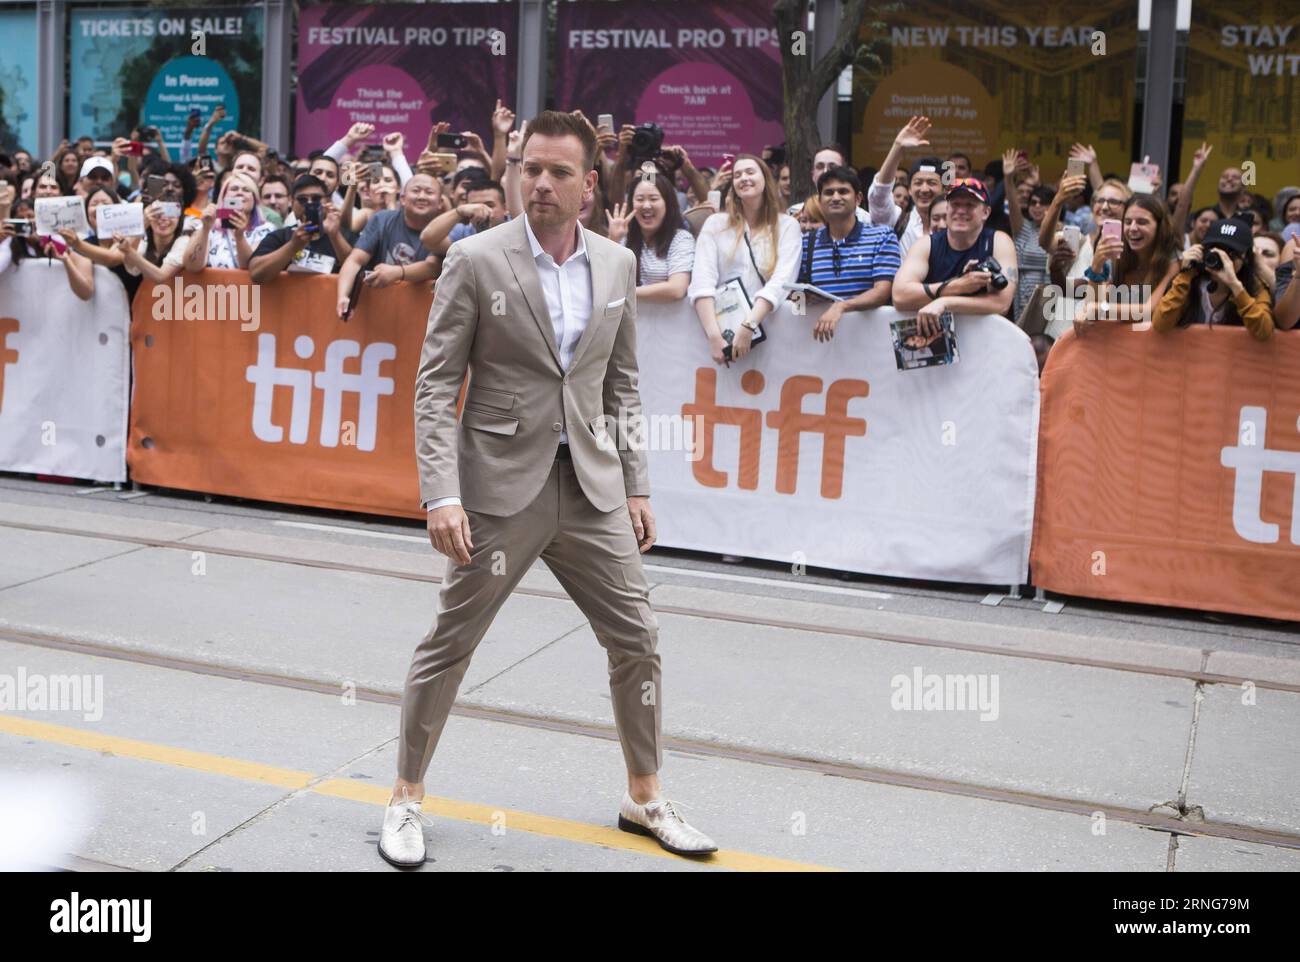 (160910) -- TORONTO, Sept. 9, 2016 -- Director Ewan McGregor arrives before the world premiere of the film American Pastoral at Princess of Wales Theatre during the 41st Toronto International Film Festival in Toronto, Canada, Sept. 9, 2016. )(yy) CANADA-TORONTO-TIFF-AMERICAN PASTORAL-PREMIERE zouxzheng PUBLICATIONxNOTxINxCHN   160910 Toronto Sept 9 2016 Director Ewan McGregor arrives Before The World Premiere of The Film American Pastoral AT Princess of Wales Theatre during The 41st Toronto International Film Festival in Toronto Canada Sept 9 2016 yy Canada Toronto TIFF American Pastoral Premi Stock Photo